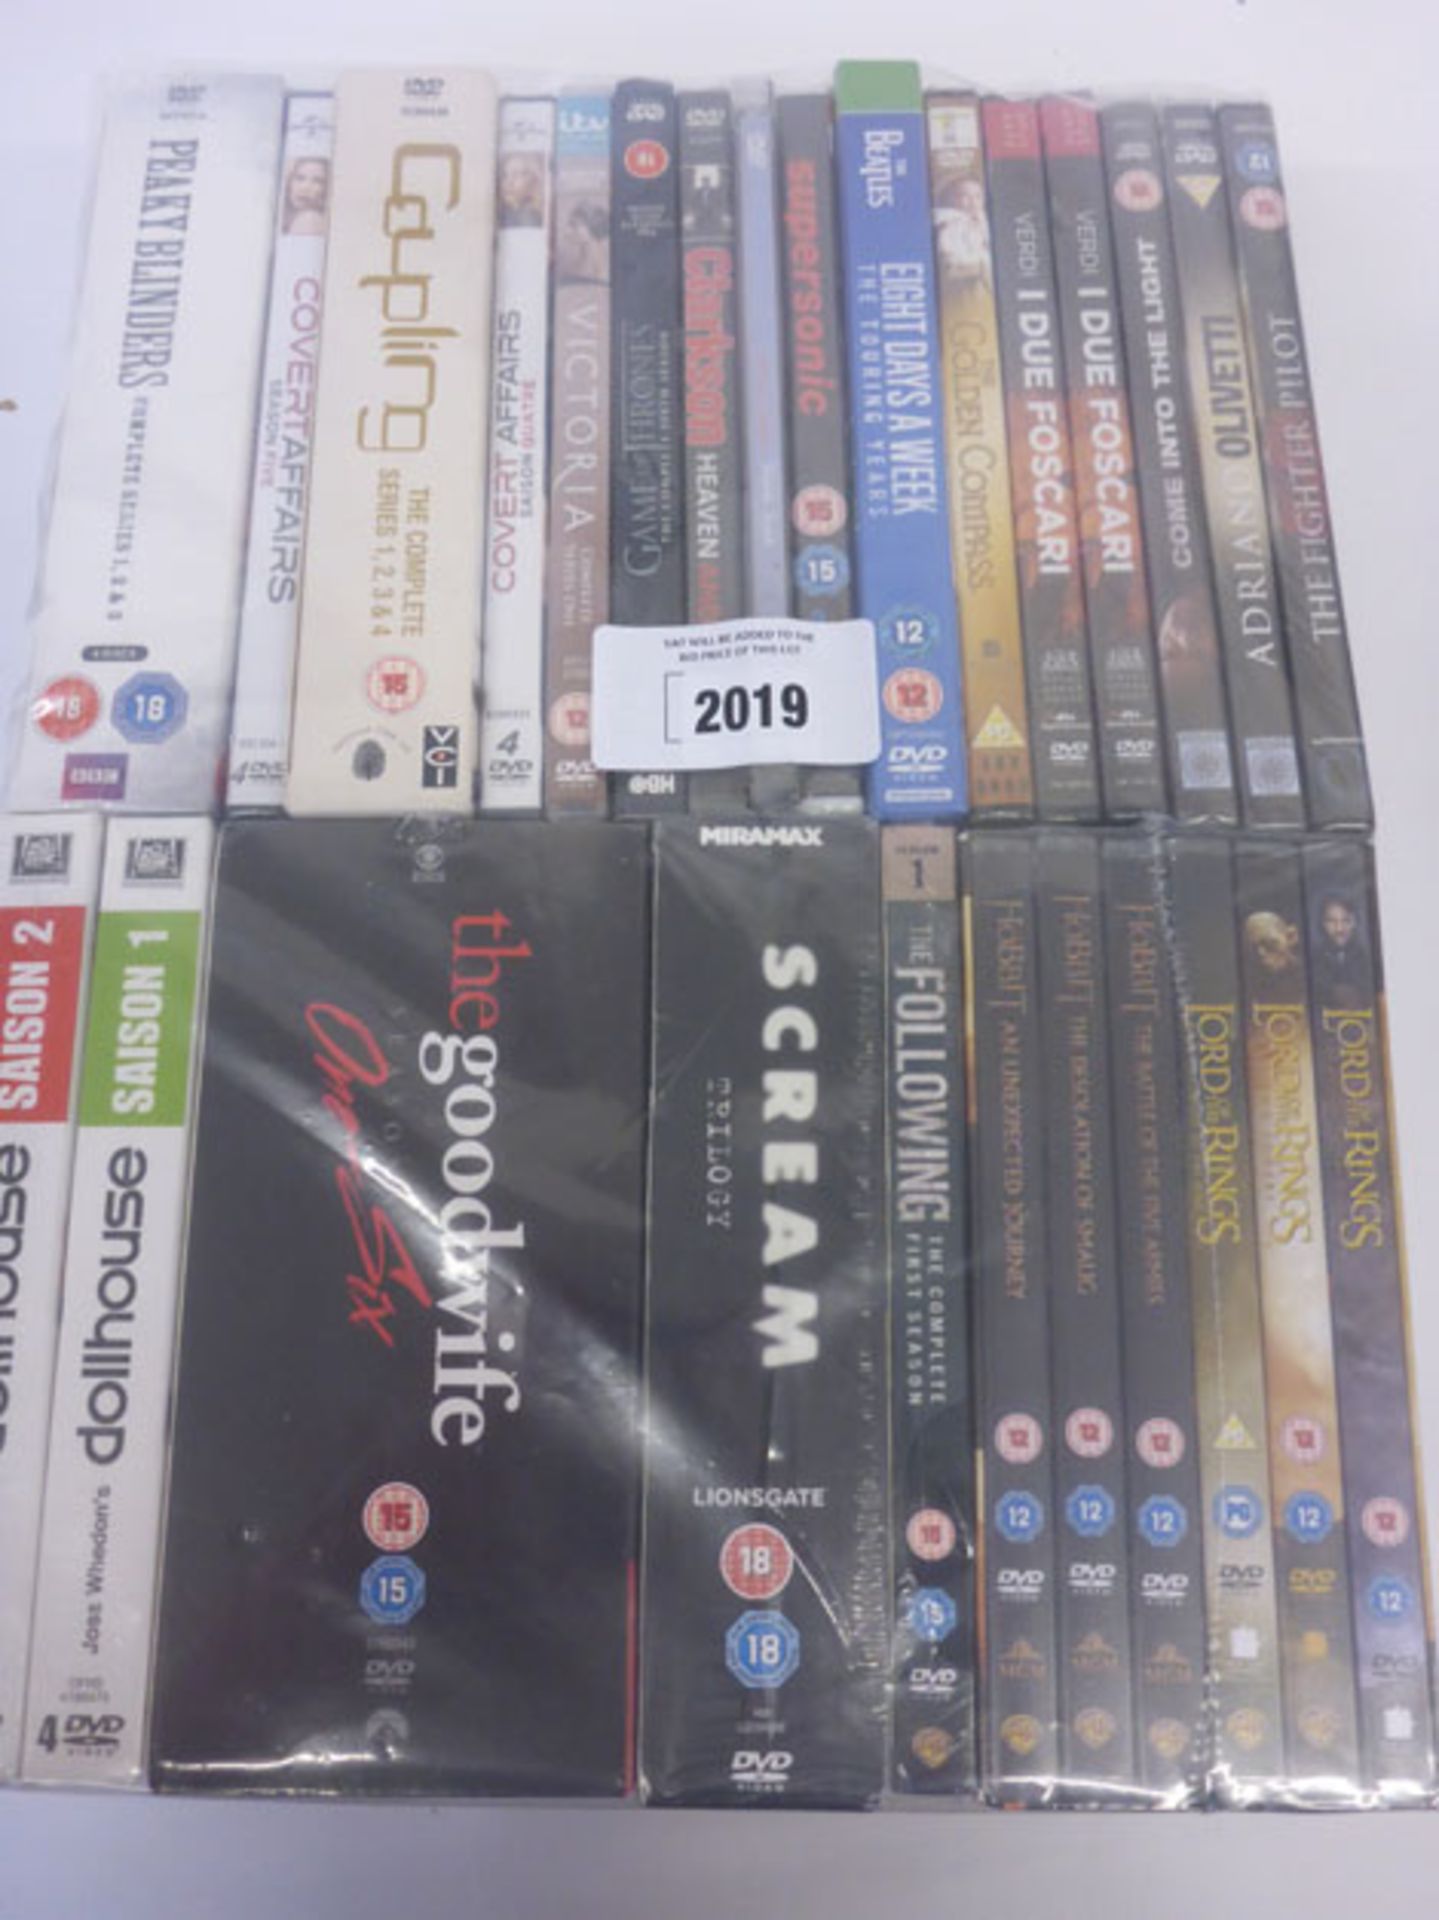 Bag containing 20 plus various titled DVD films